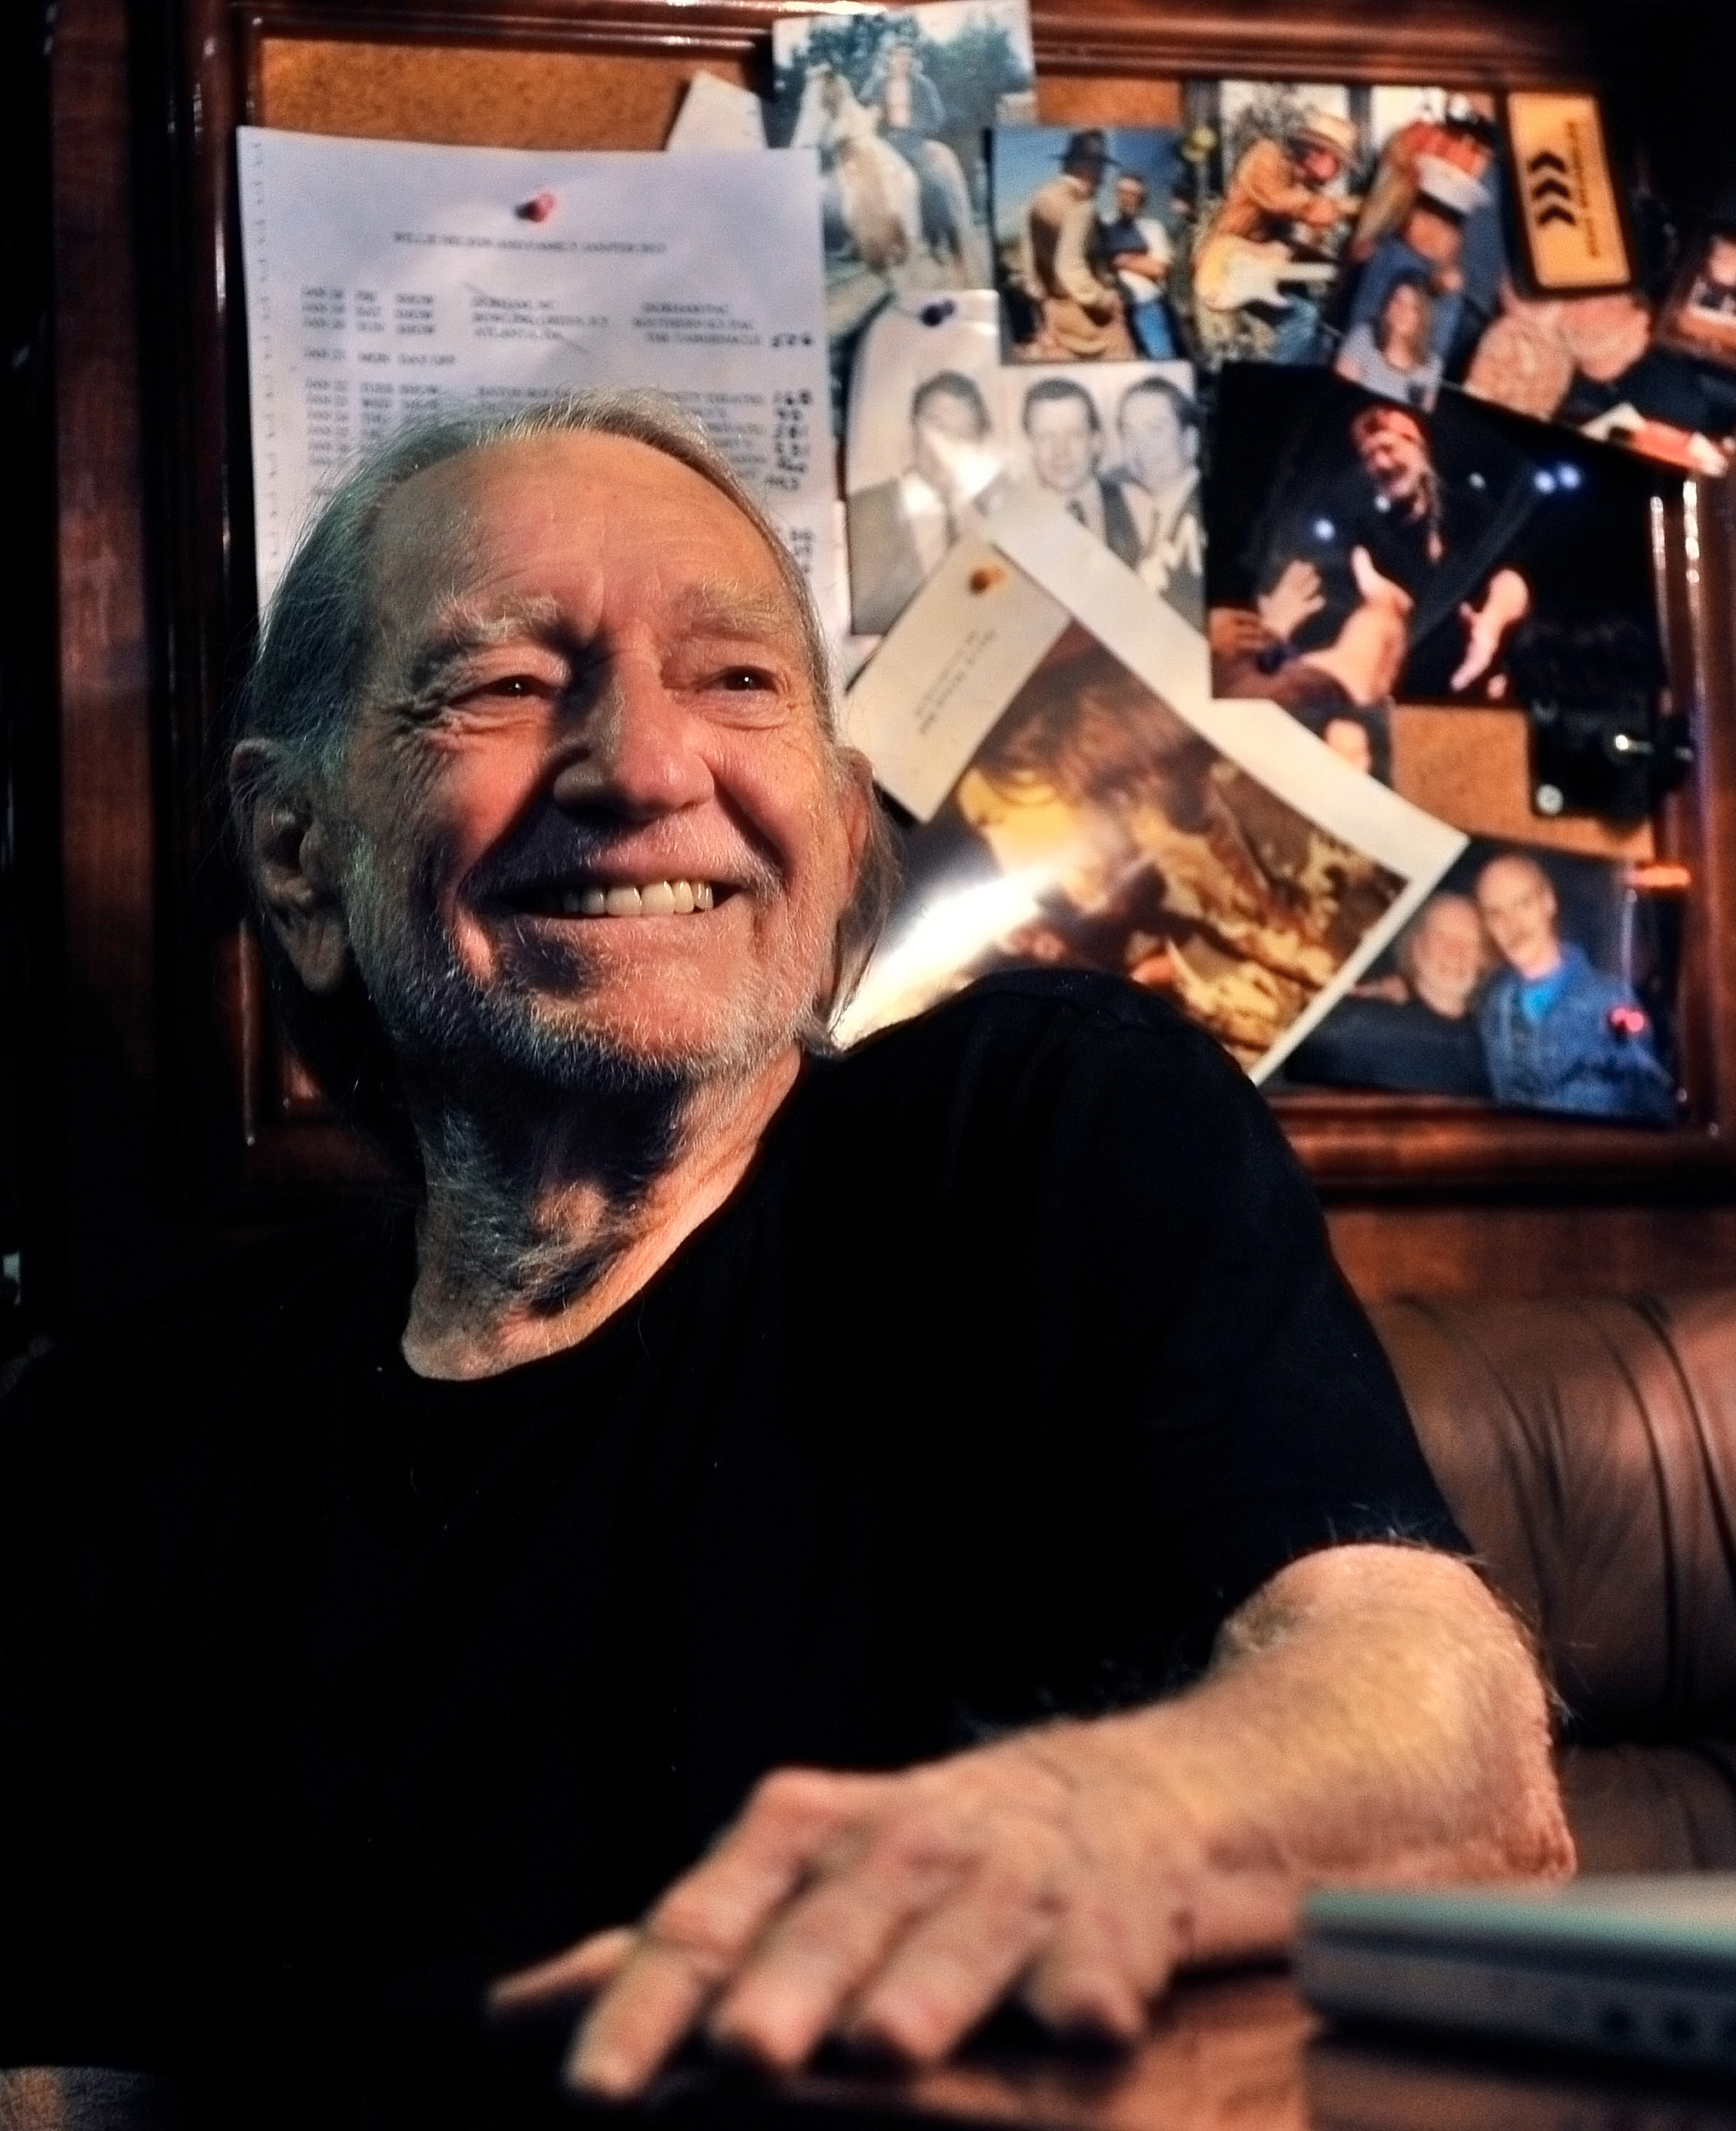  Willie Nelson on his tour bus after performing with Kris Kristofferson at the legendary Bluebird Cafe January 27, 2013 in Nashville, TN.  